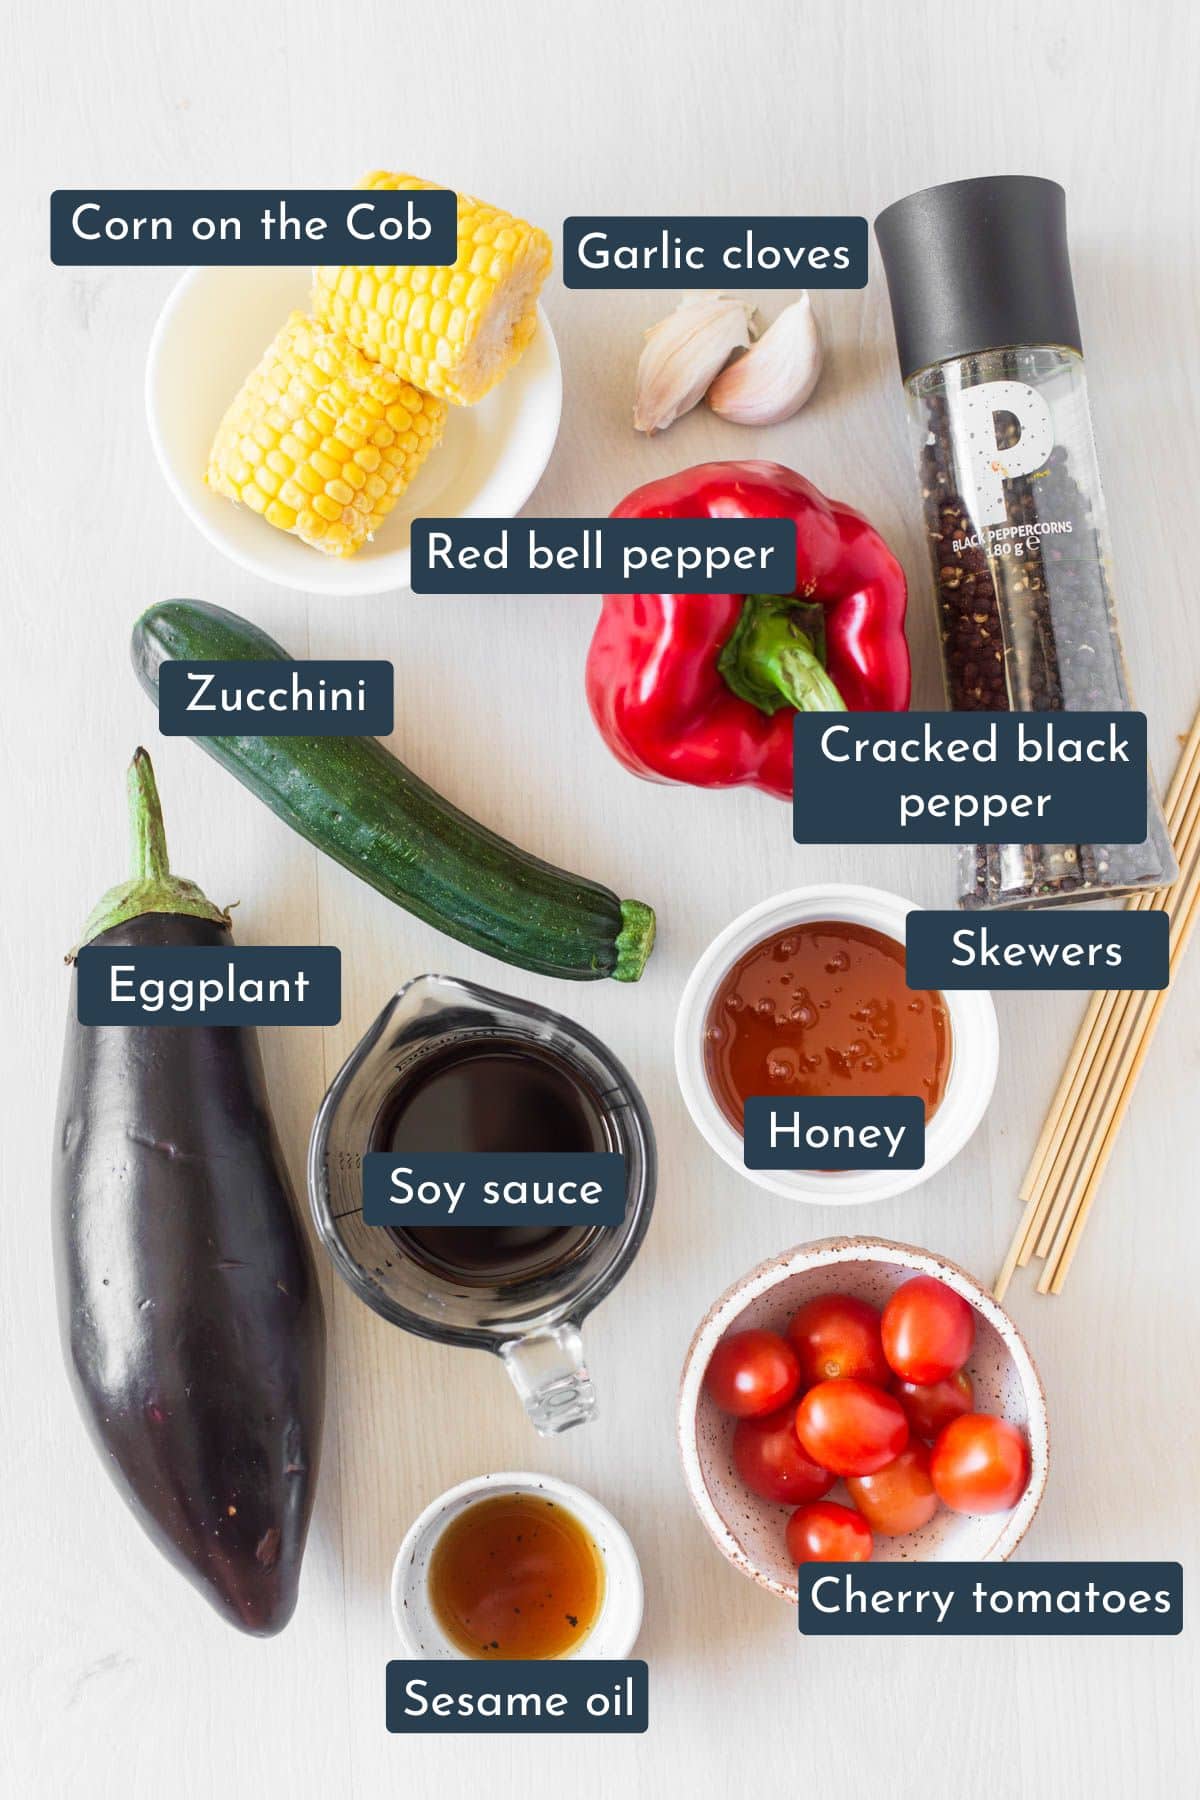 Individual ingredients laid out to make vegetable bbq skewers are garlic, honey, soy sauce, sesame oil, cracked black pepper, zucchini, eggplant, red bell pepper, cherry tomatoes, corn on the cob and wooden or metal skewers.